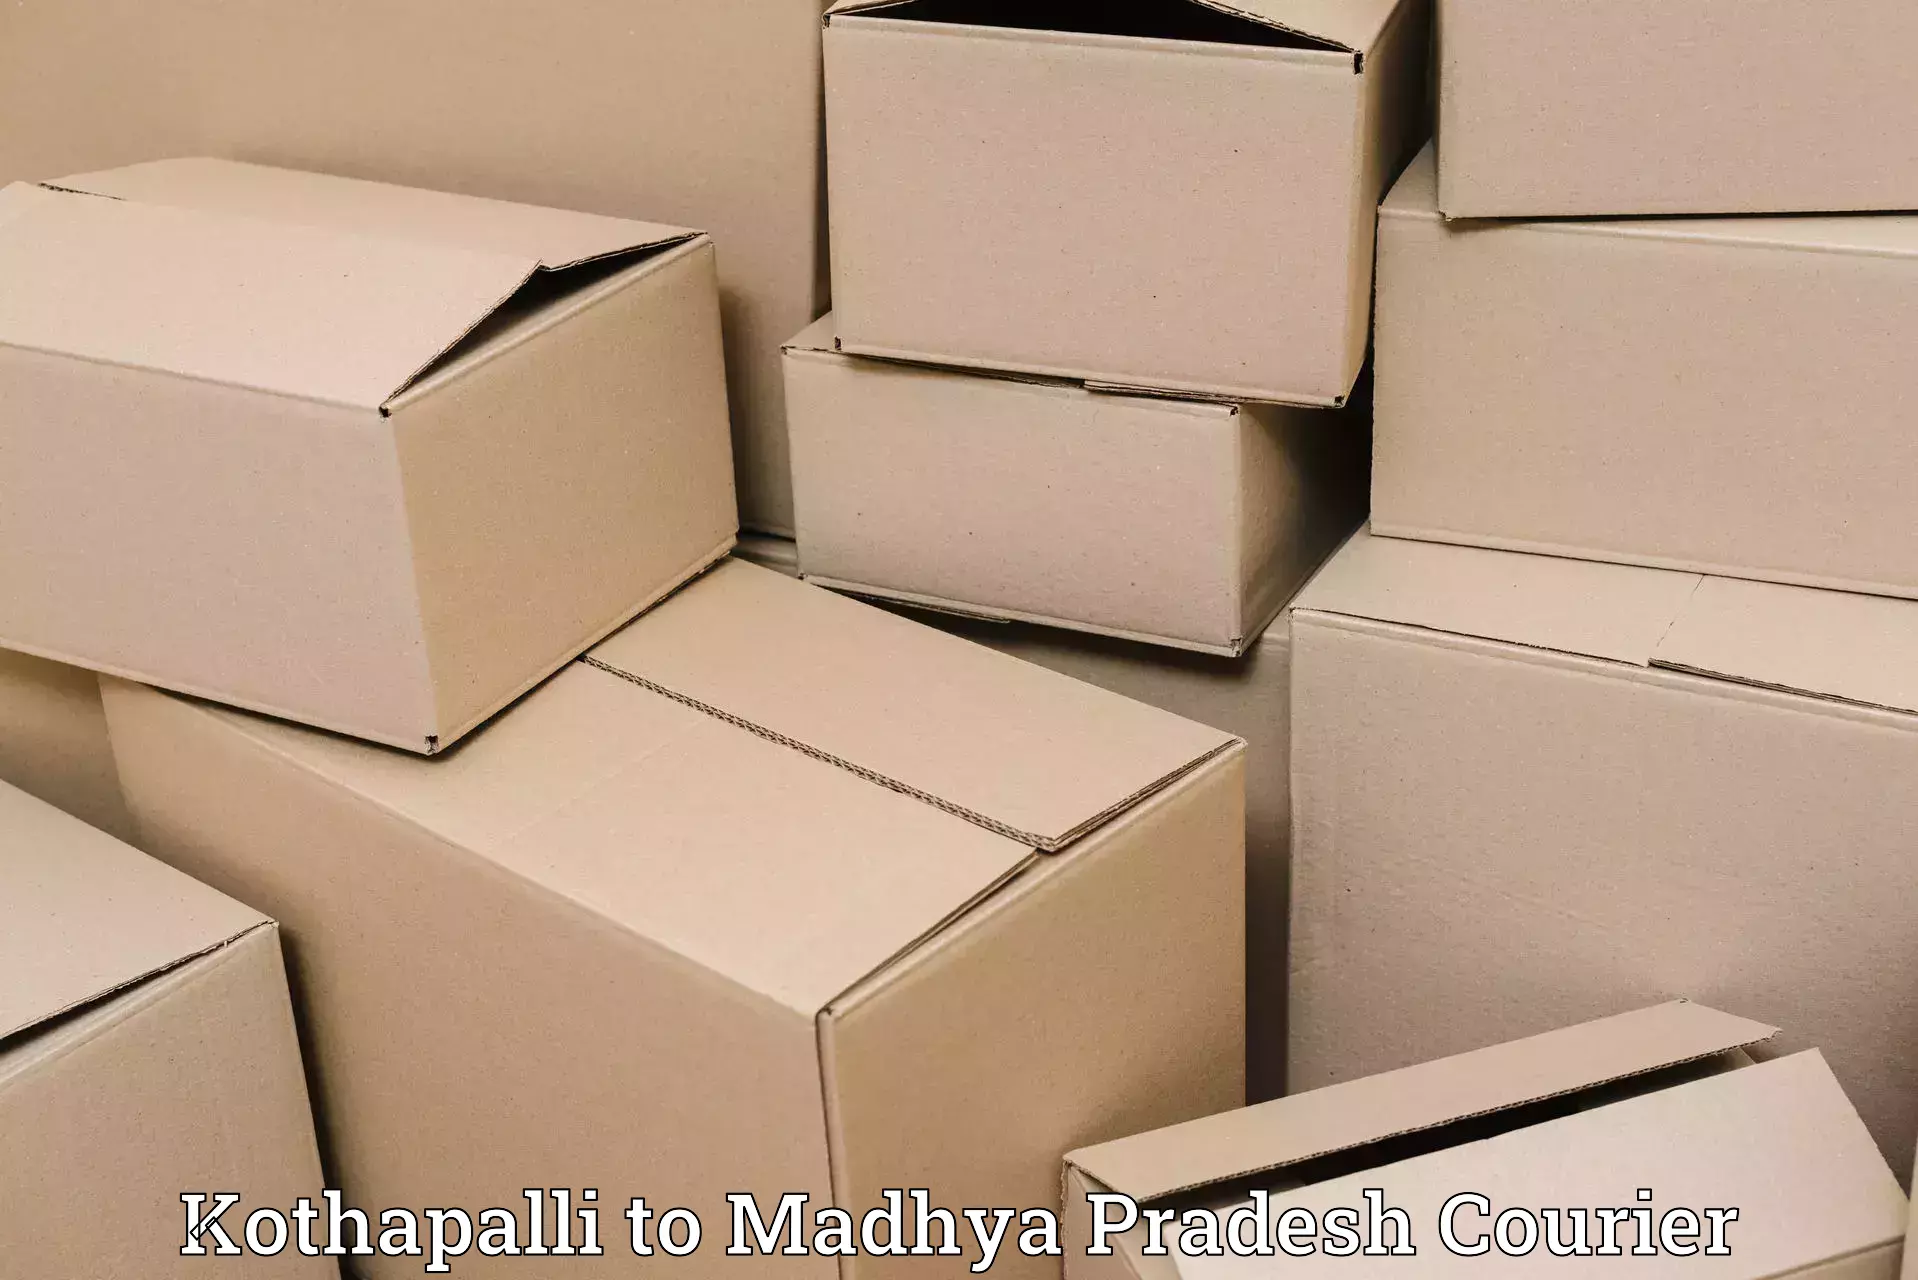 Online package tracking Kothapalli to Khandwa